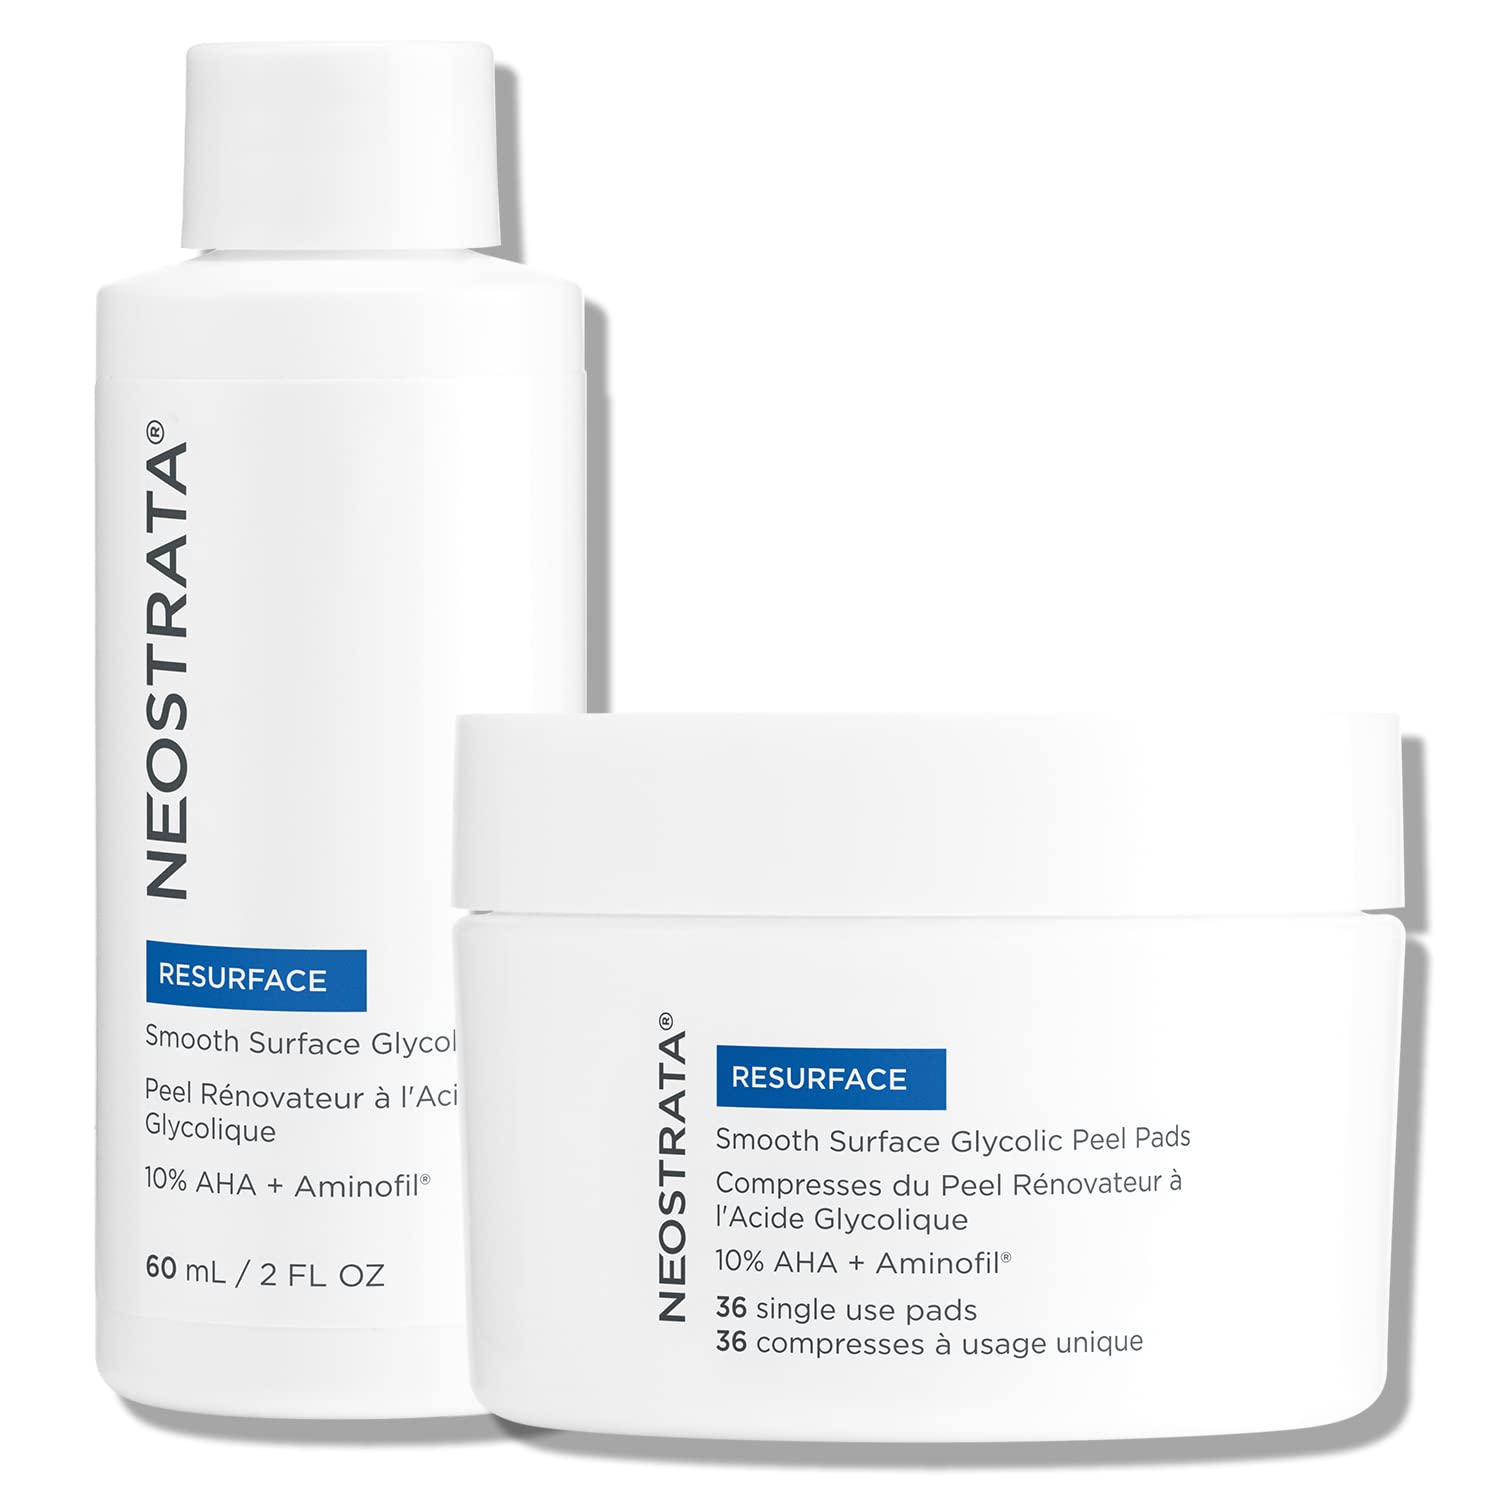 NeoStrata Resurface Smooth Surface Glycolic Chemical Peel